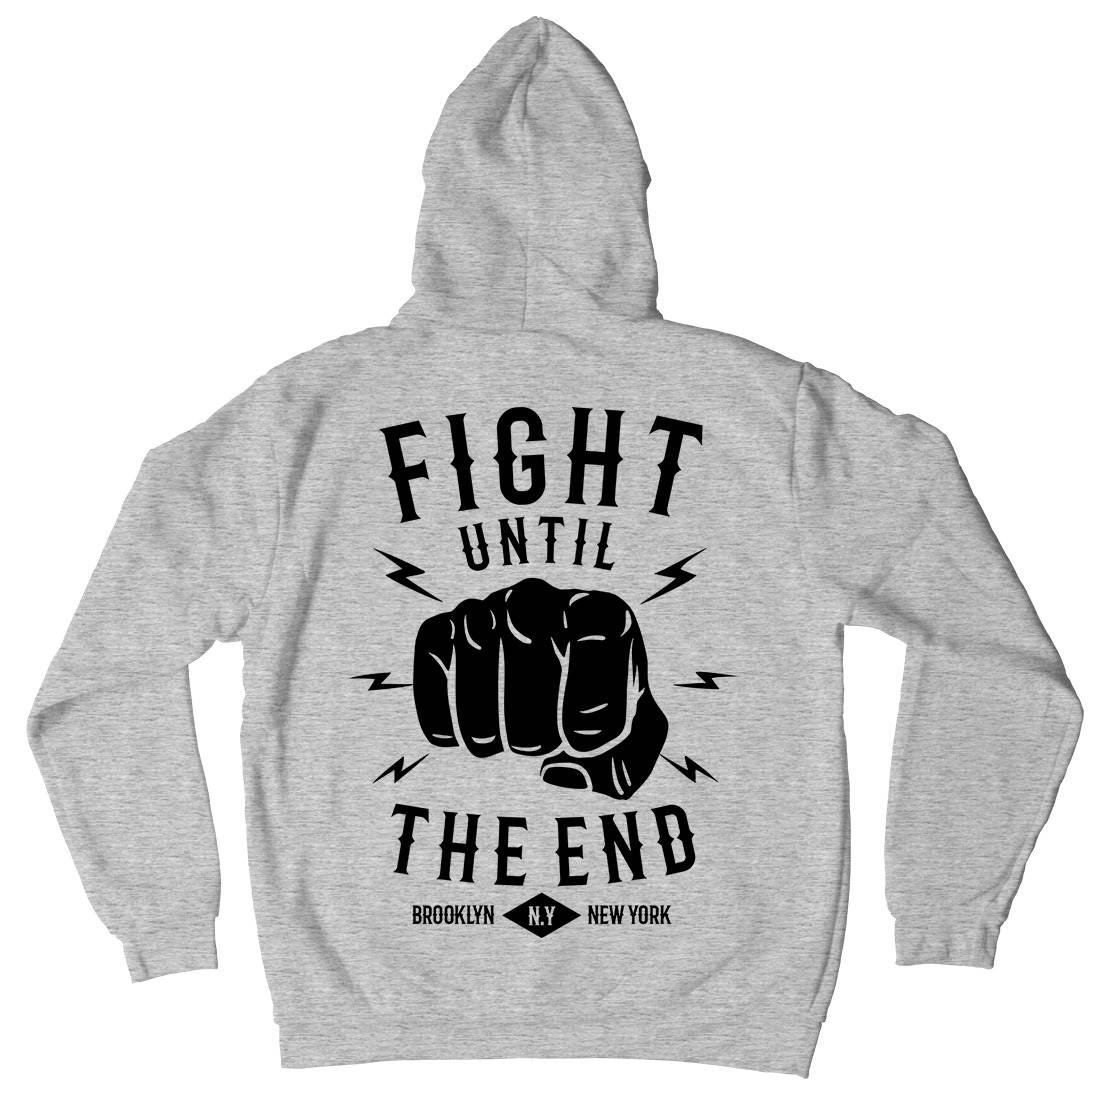 Fight Until The End Kids Crew Neck Hoodie Sport B206